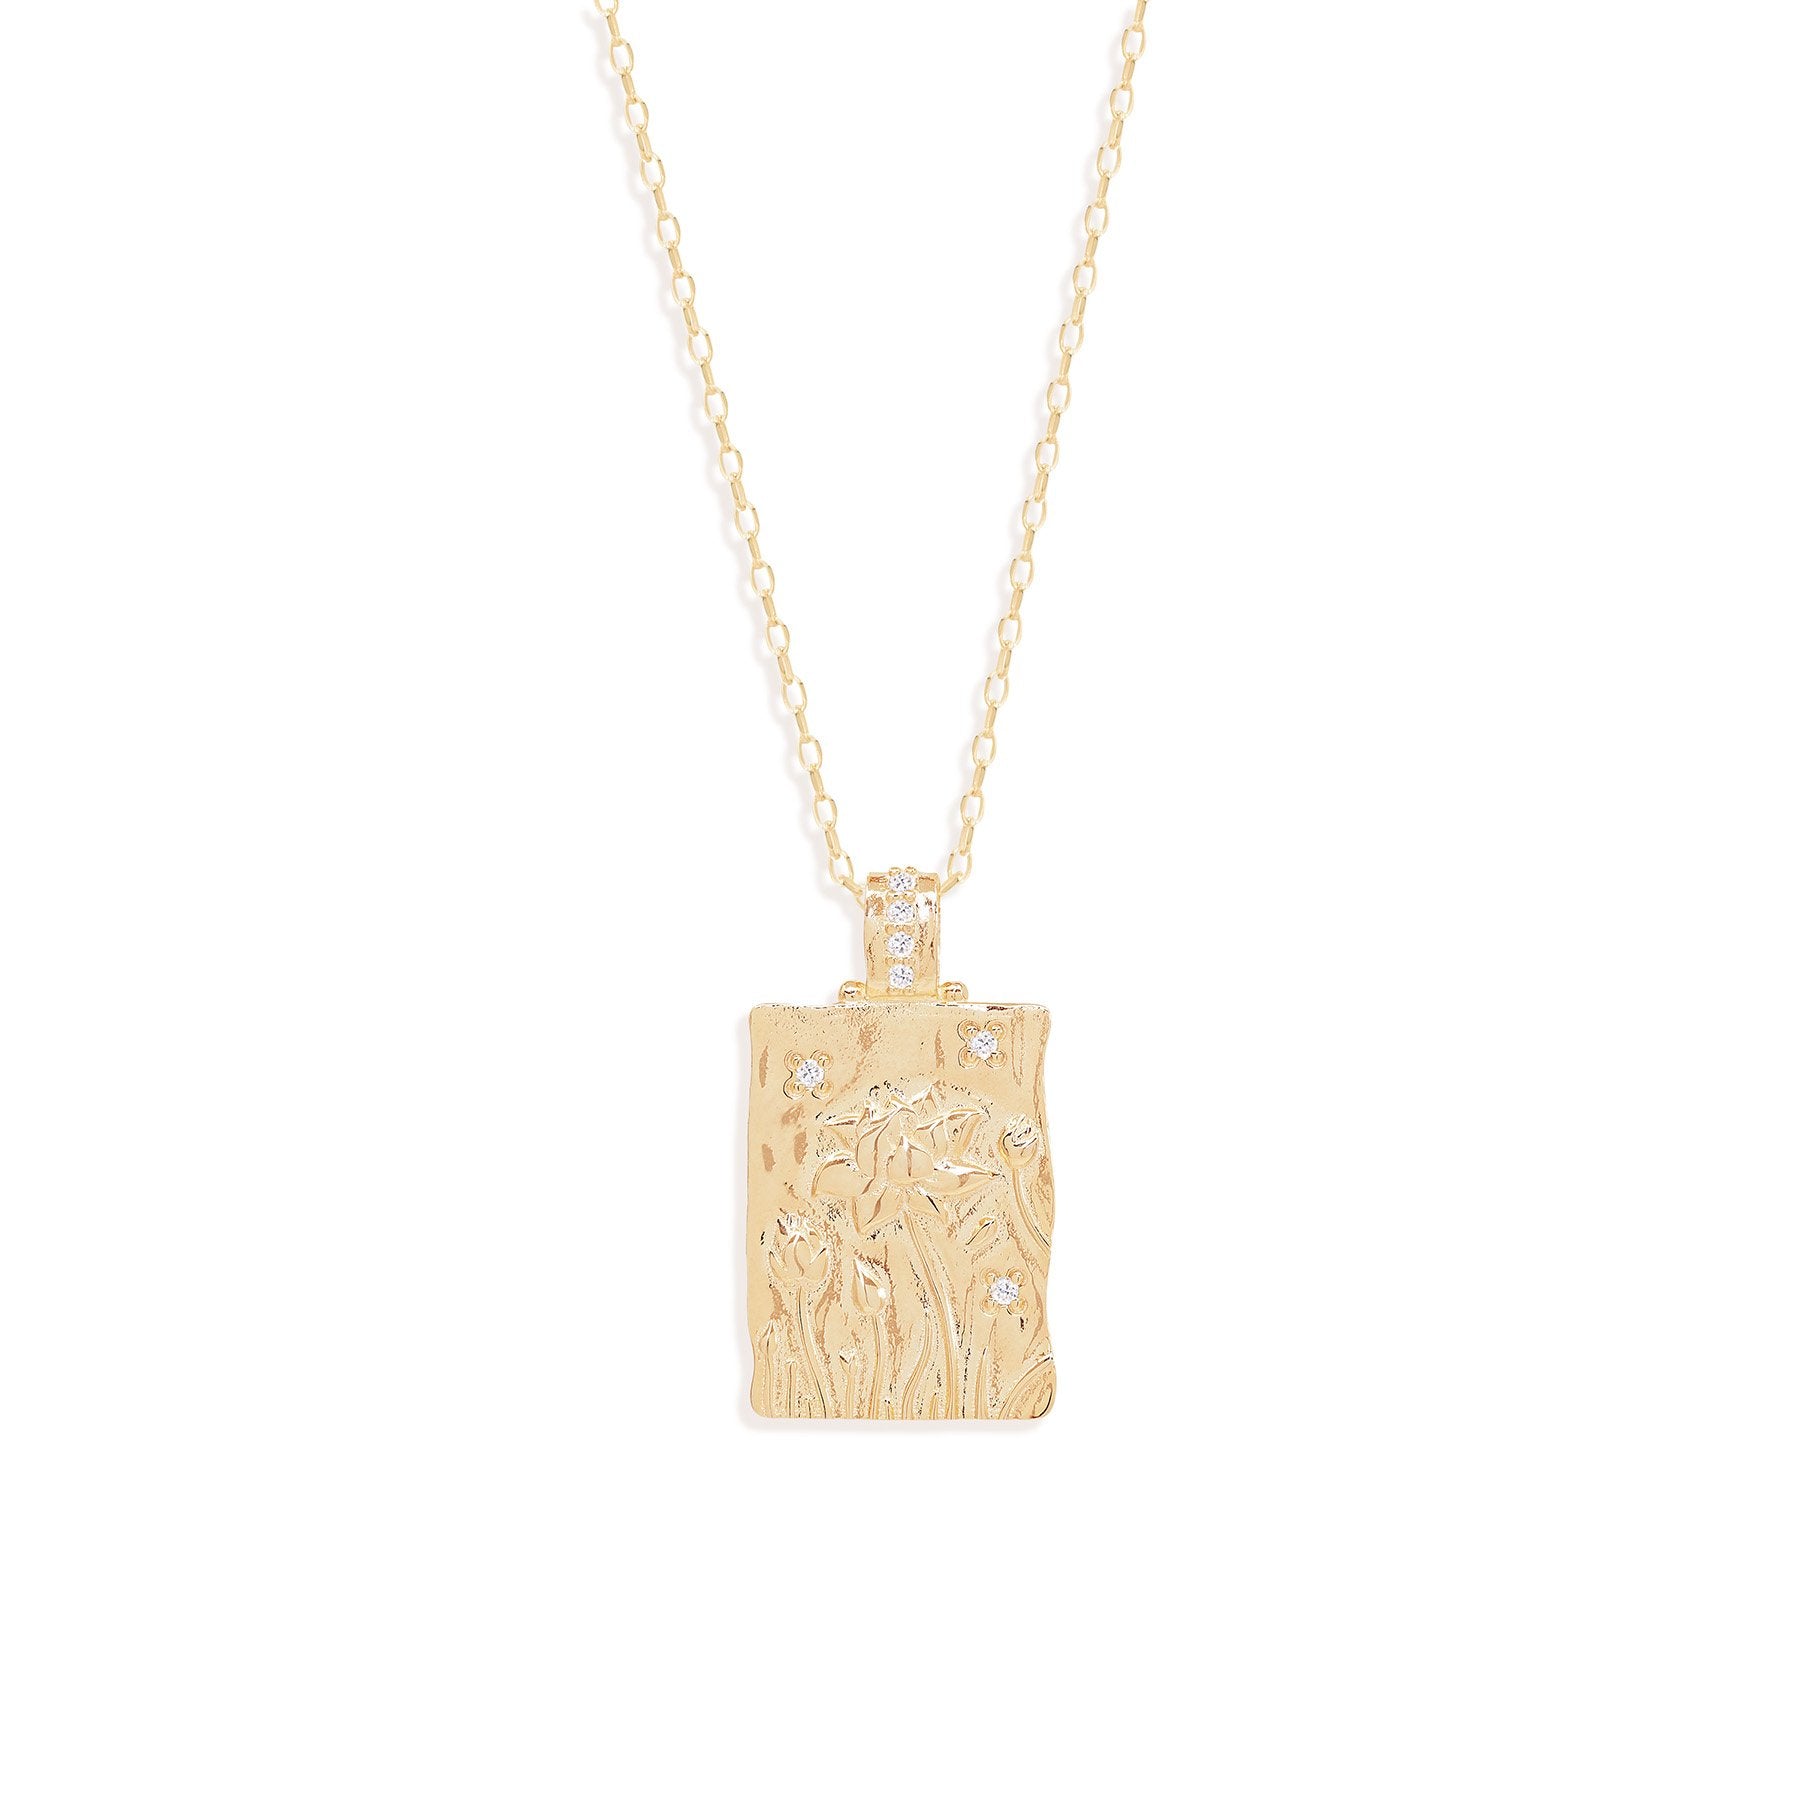 By Charlotte Gold Blooming Under The Same Sun Necklace